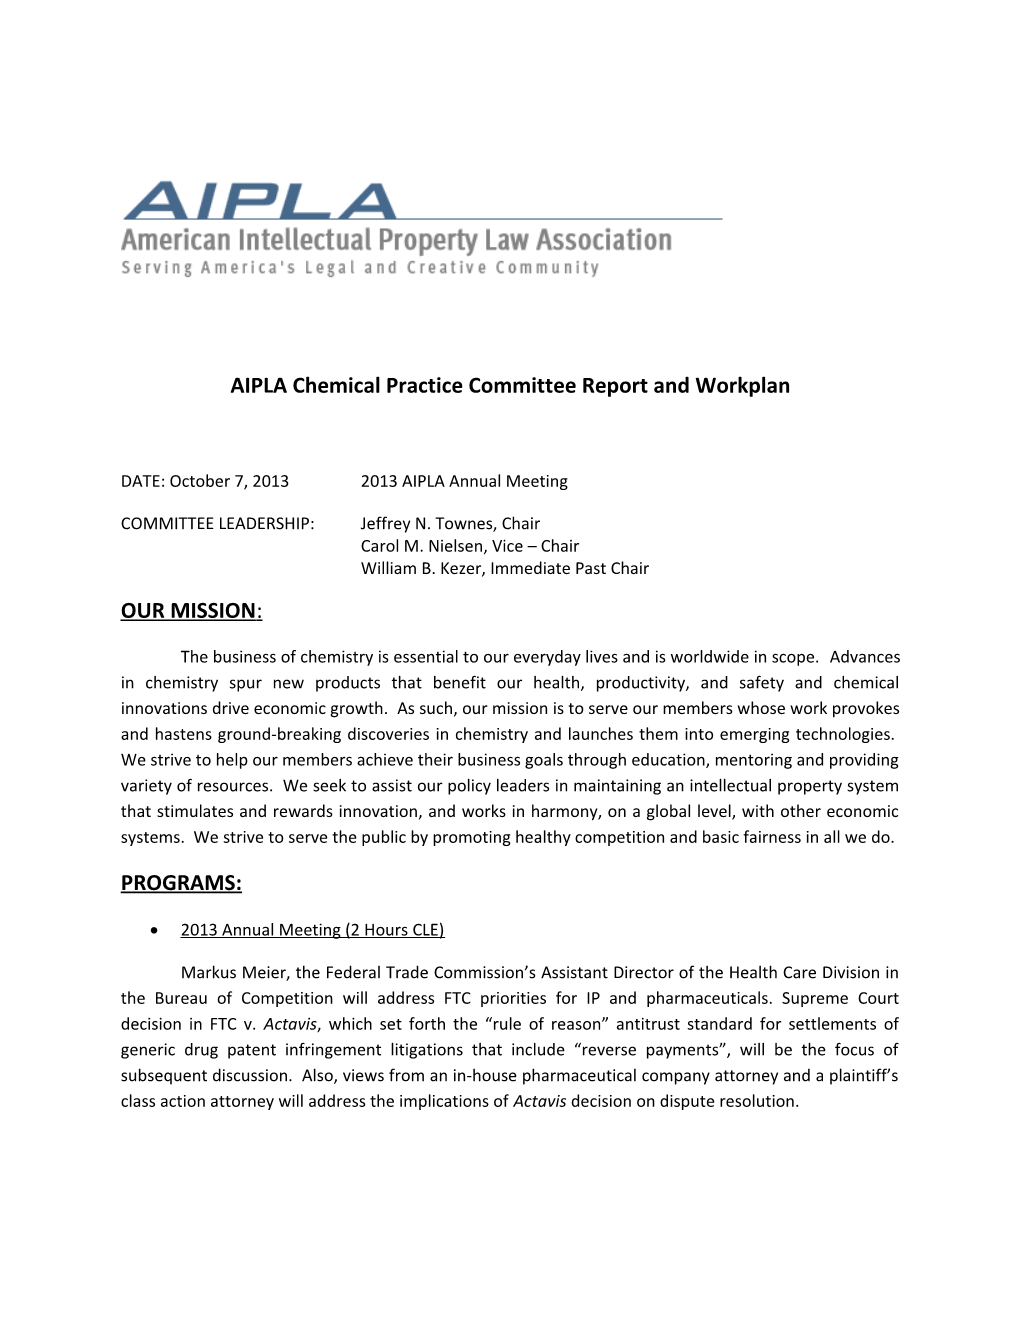 AIPLA Chemical Practice Committee Report and Workplan